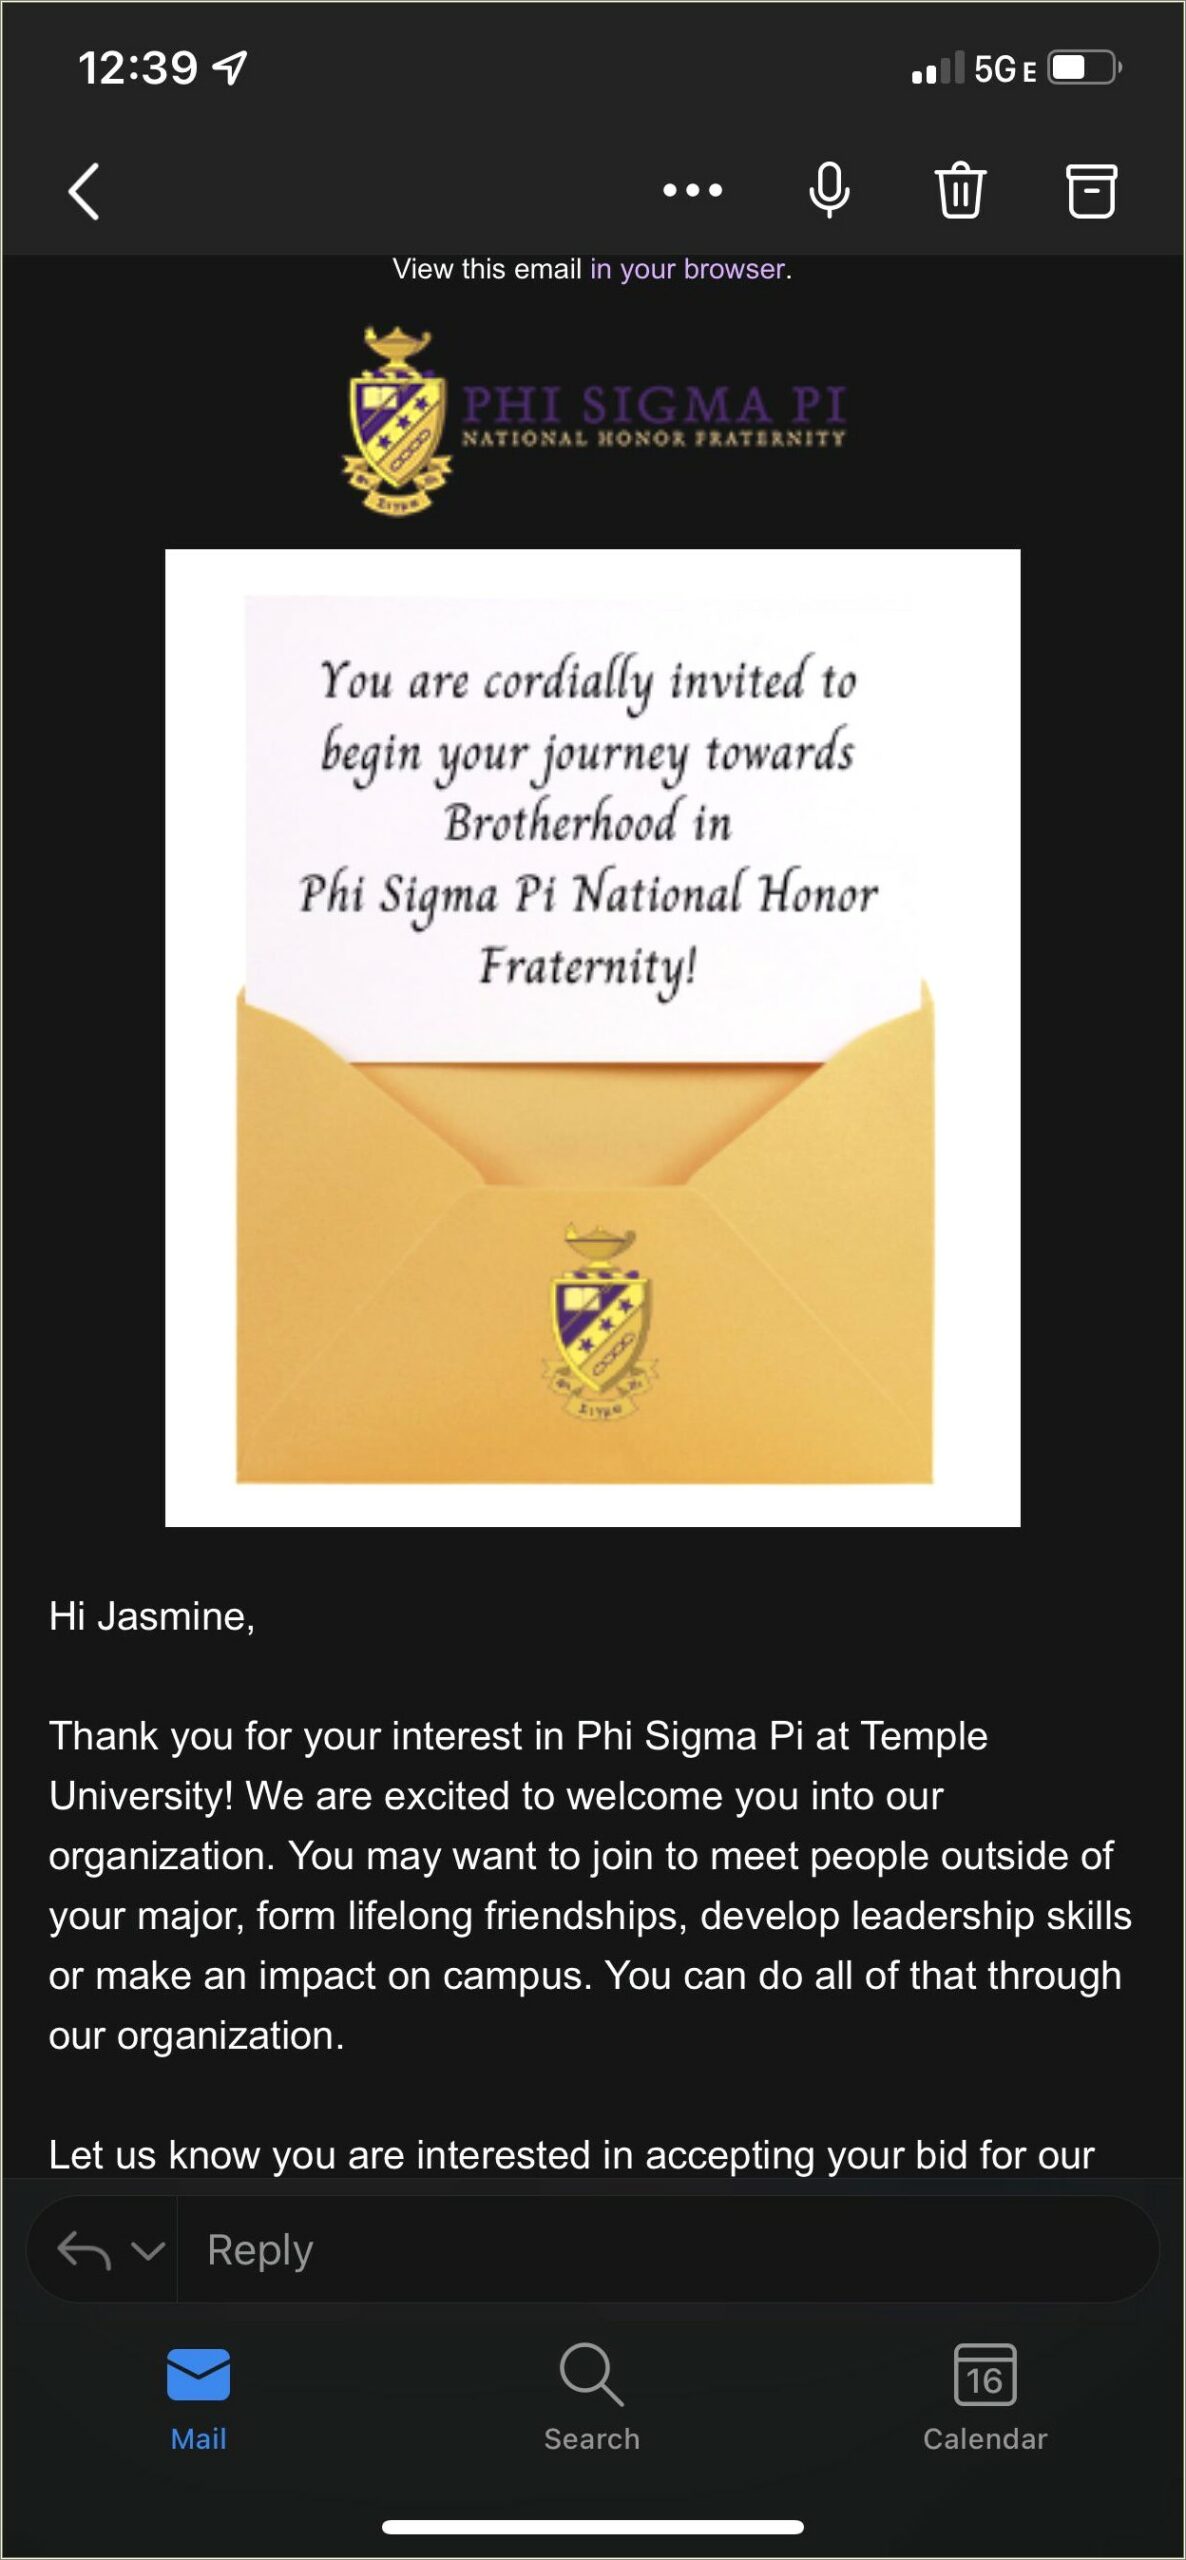 Does Phi Sigma Pi Look Good Resume